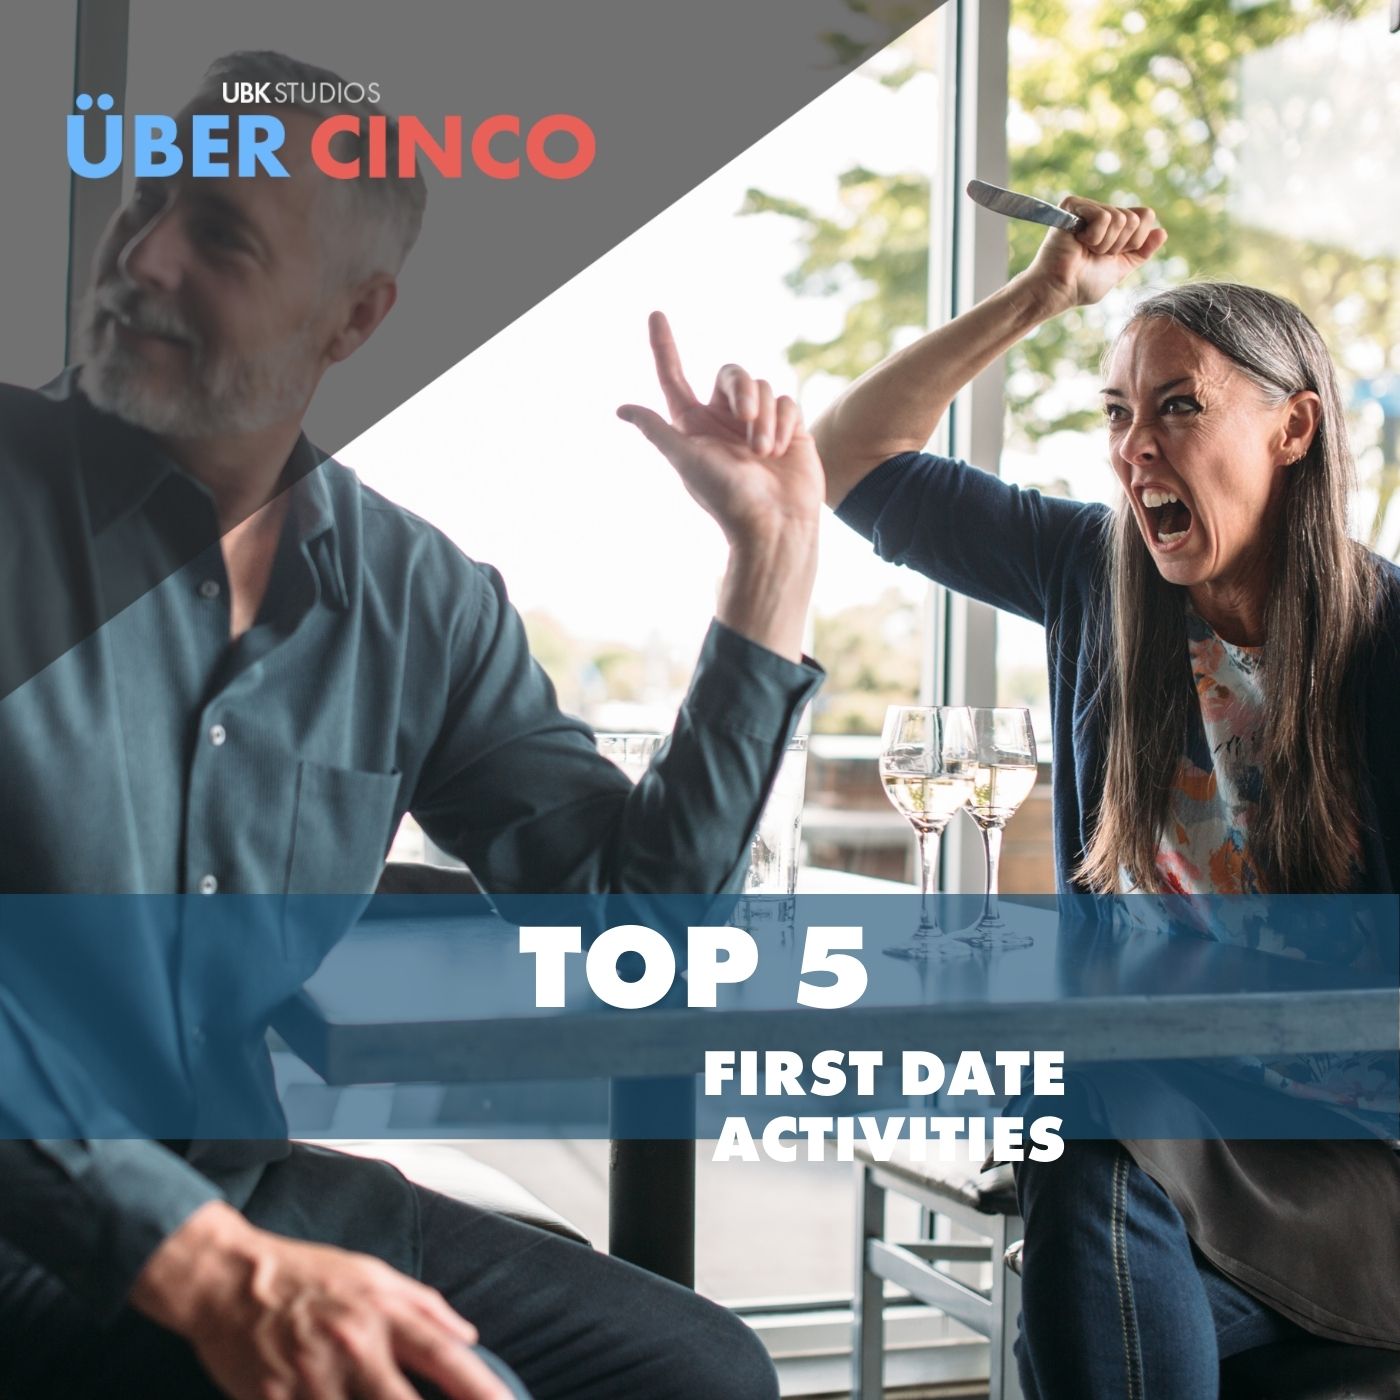 Top 5 First Date Activities Image